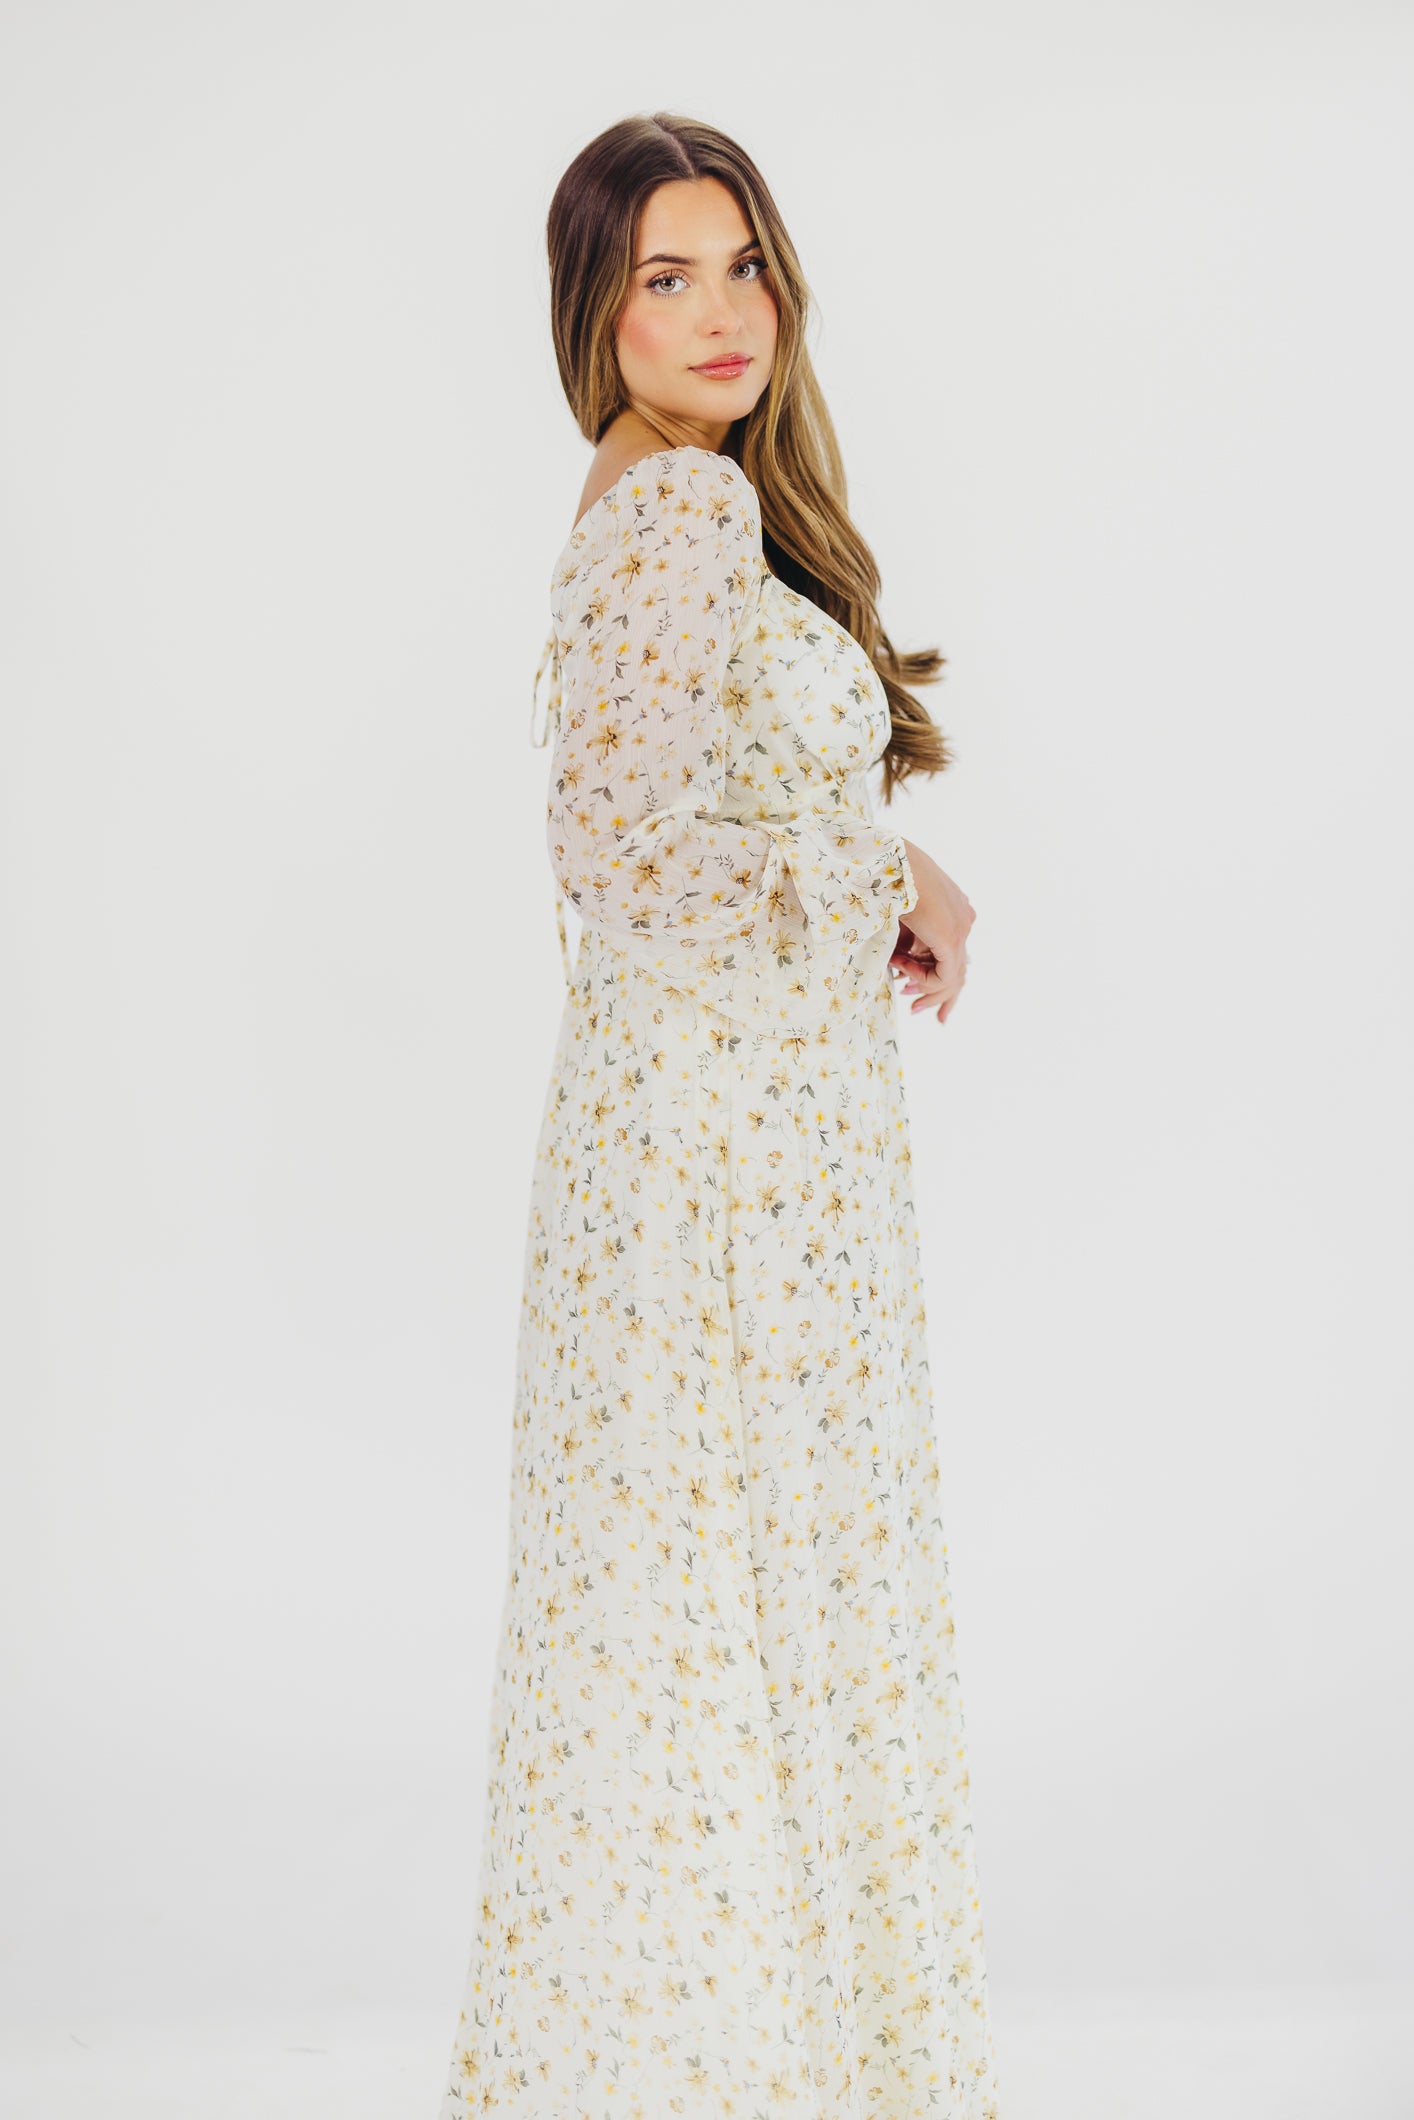 Parker Smocked Maxi Dress with Puffed Sleeves in Ivory/Yellow - Bump Friendly & Inclusive Sizing (S-3XL)